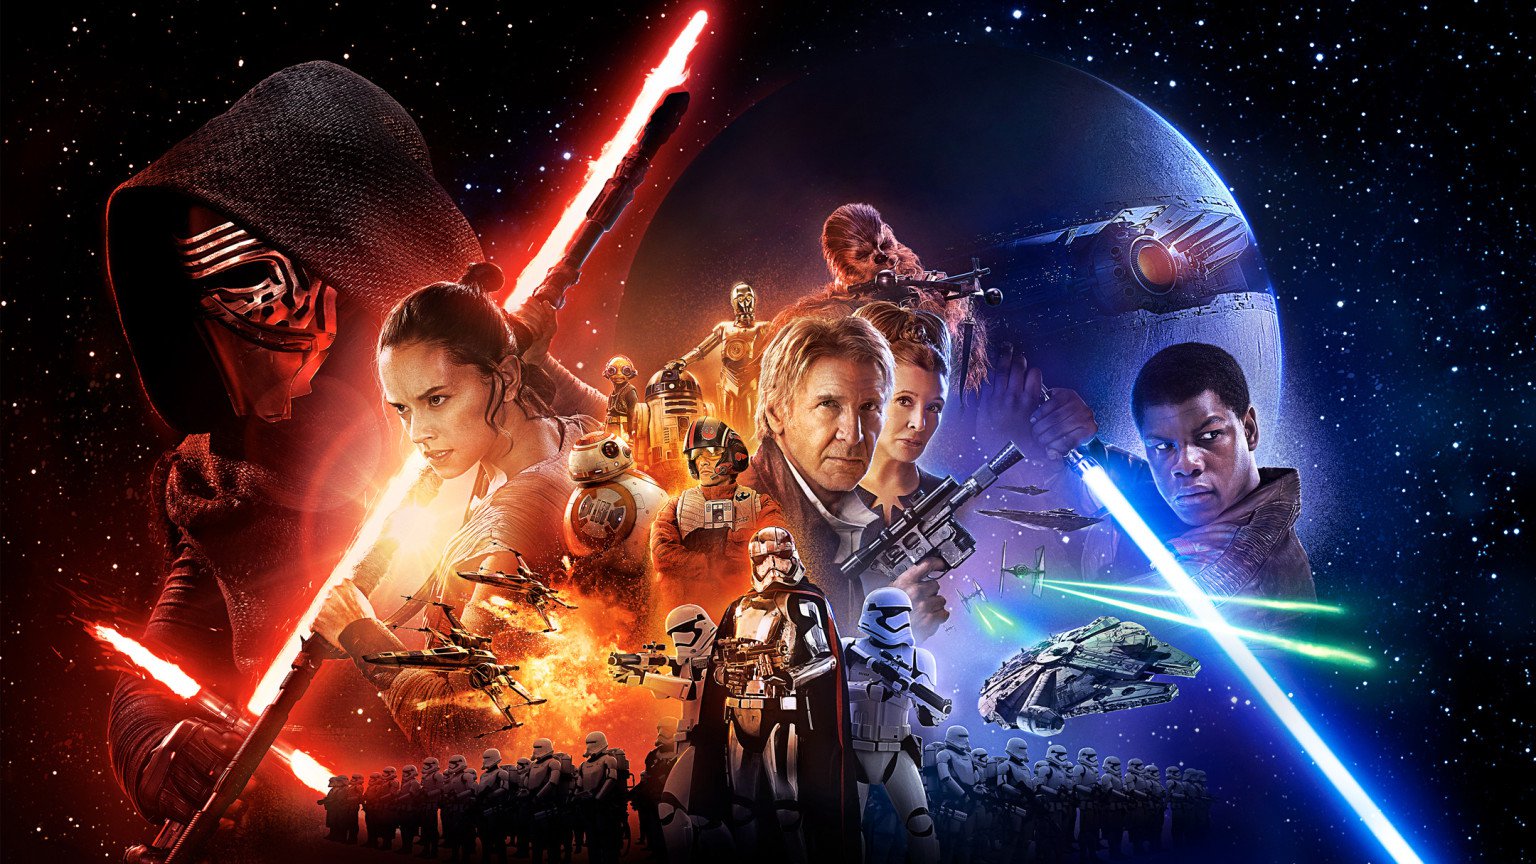 The Week in Star Wars New poster and trailer for The Force Awakens